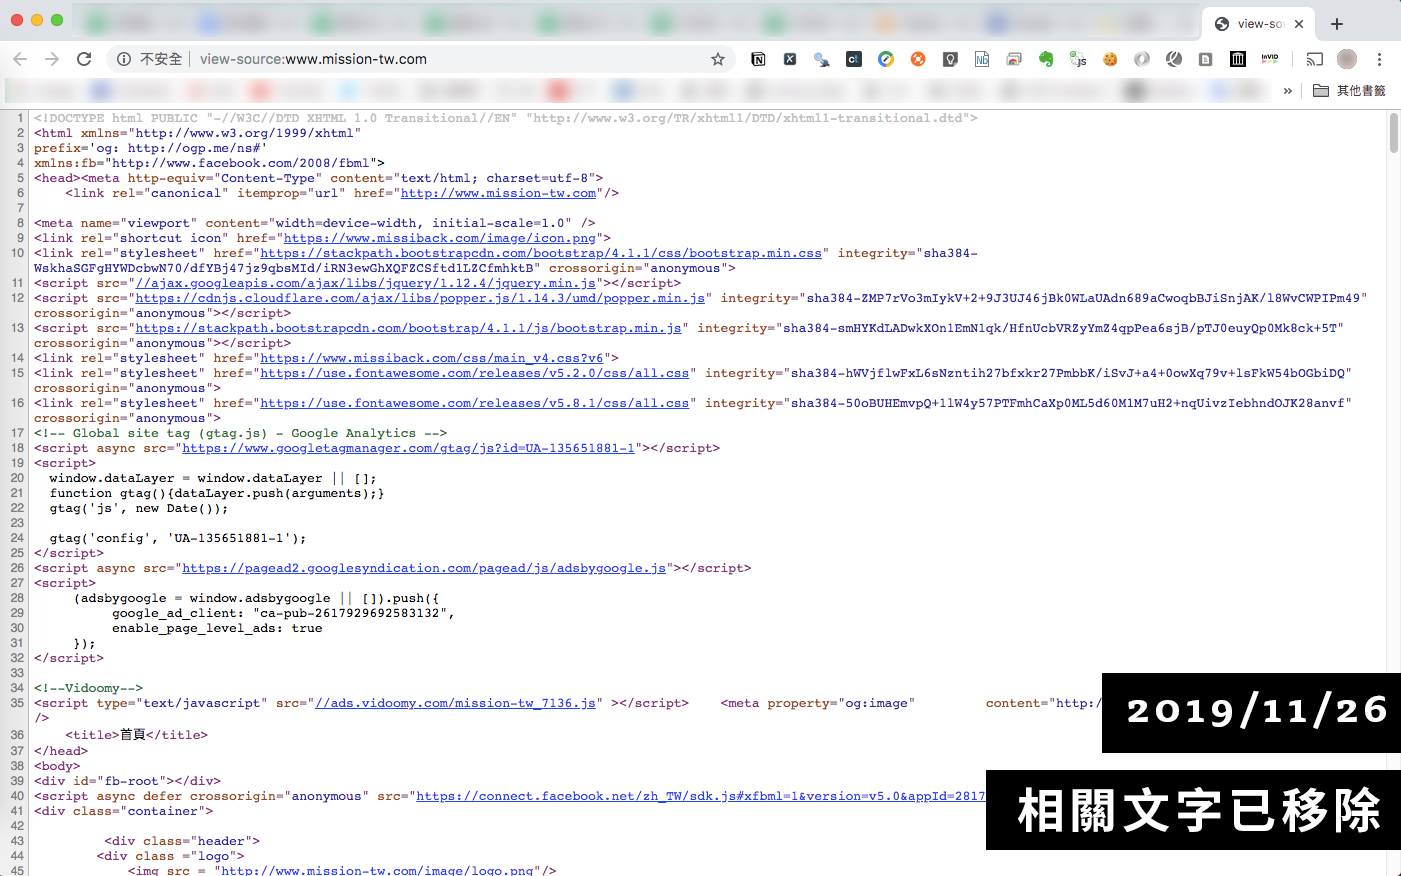  In October 2019,  The Reporter  found Lin Cheng-kuo's name in the source code of the  Mission  web page. 